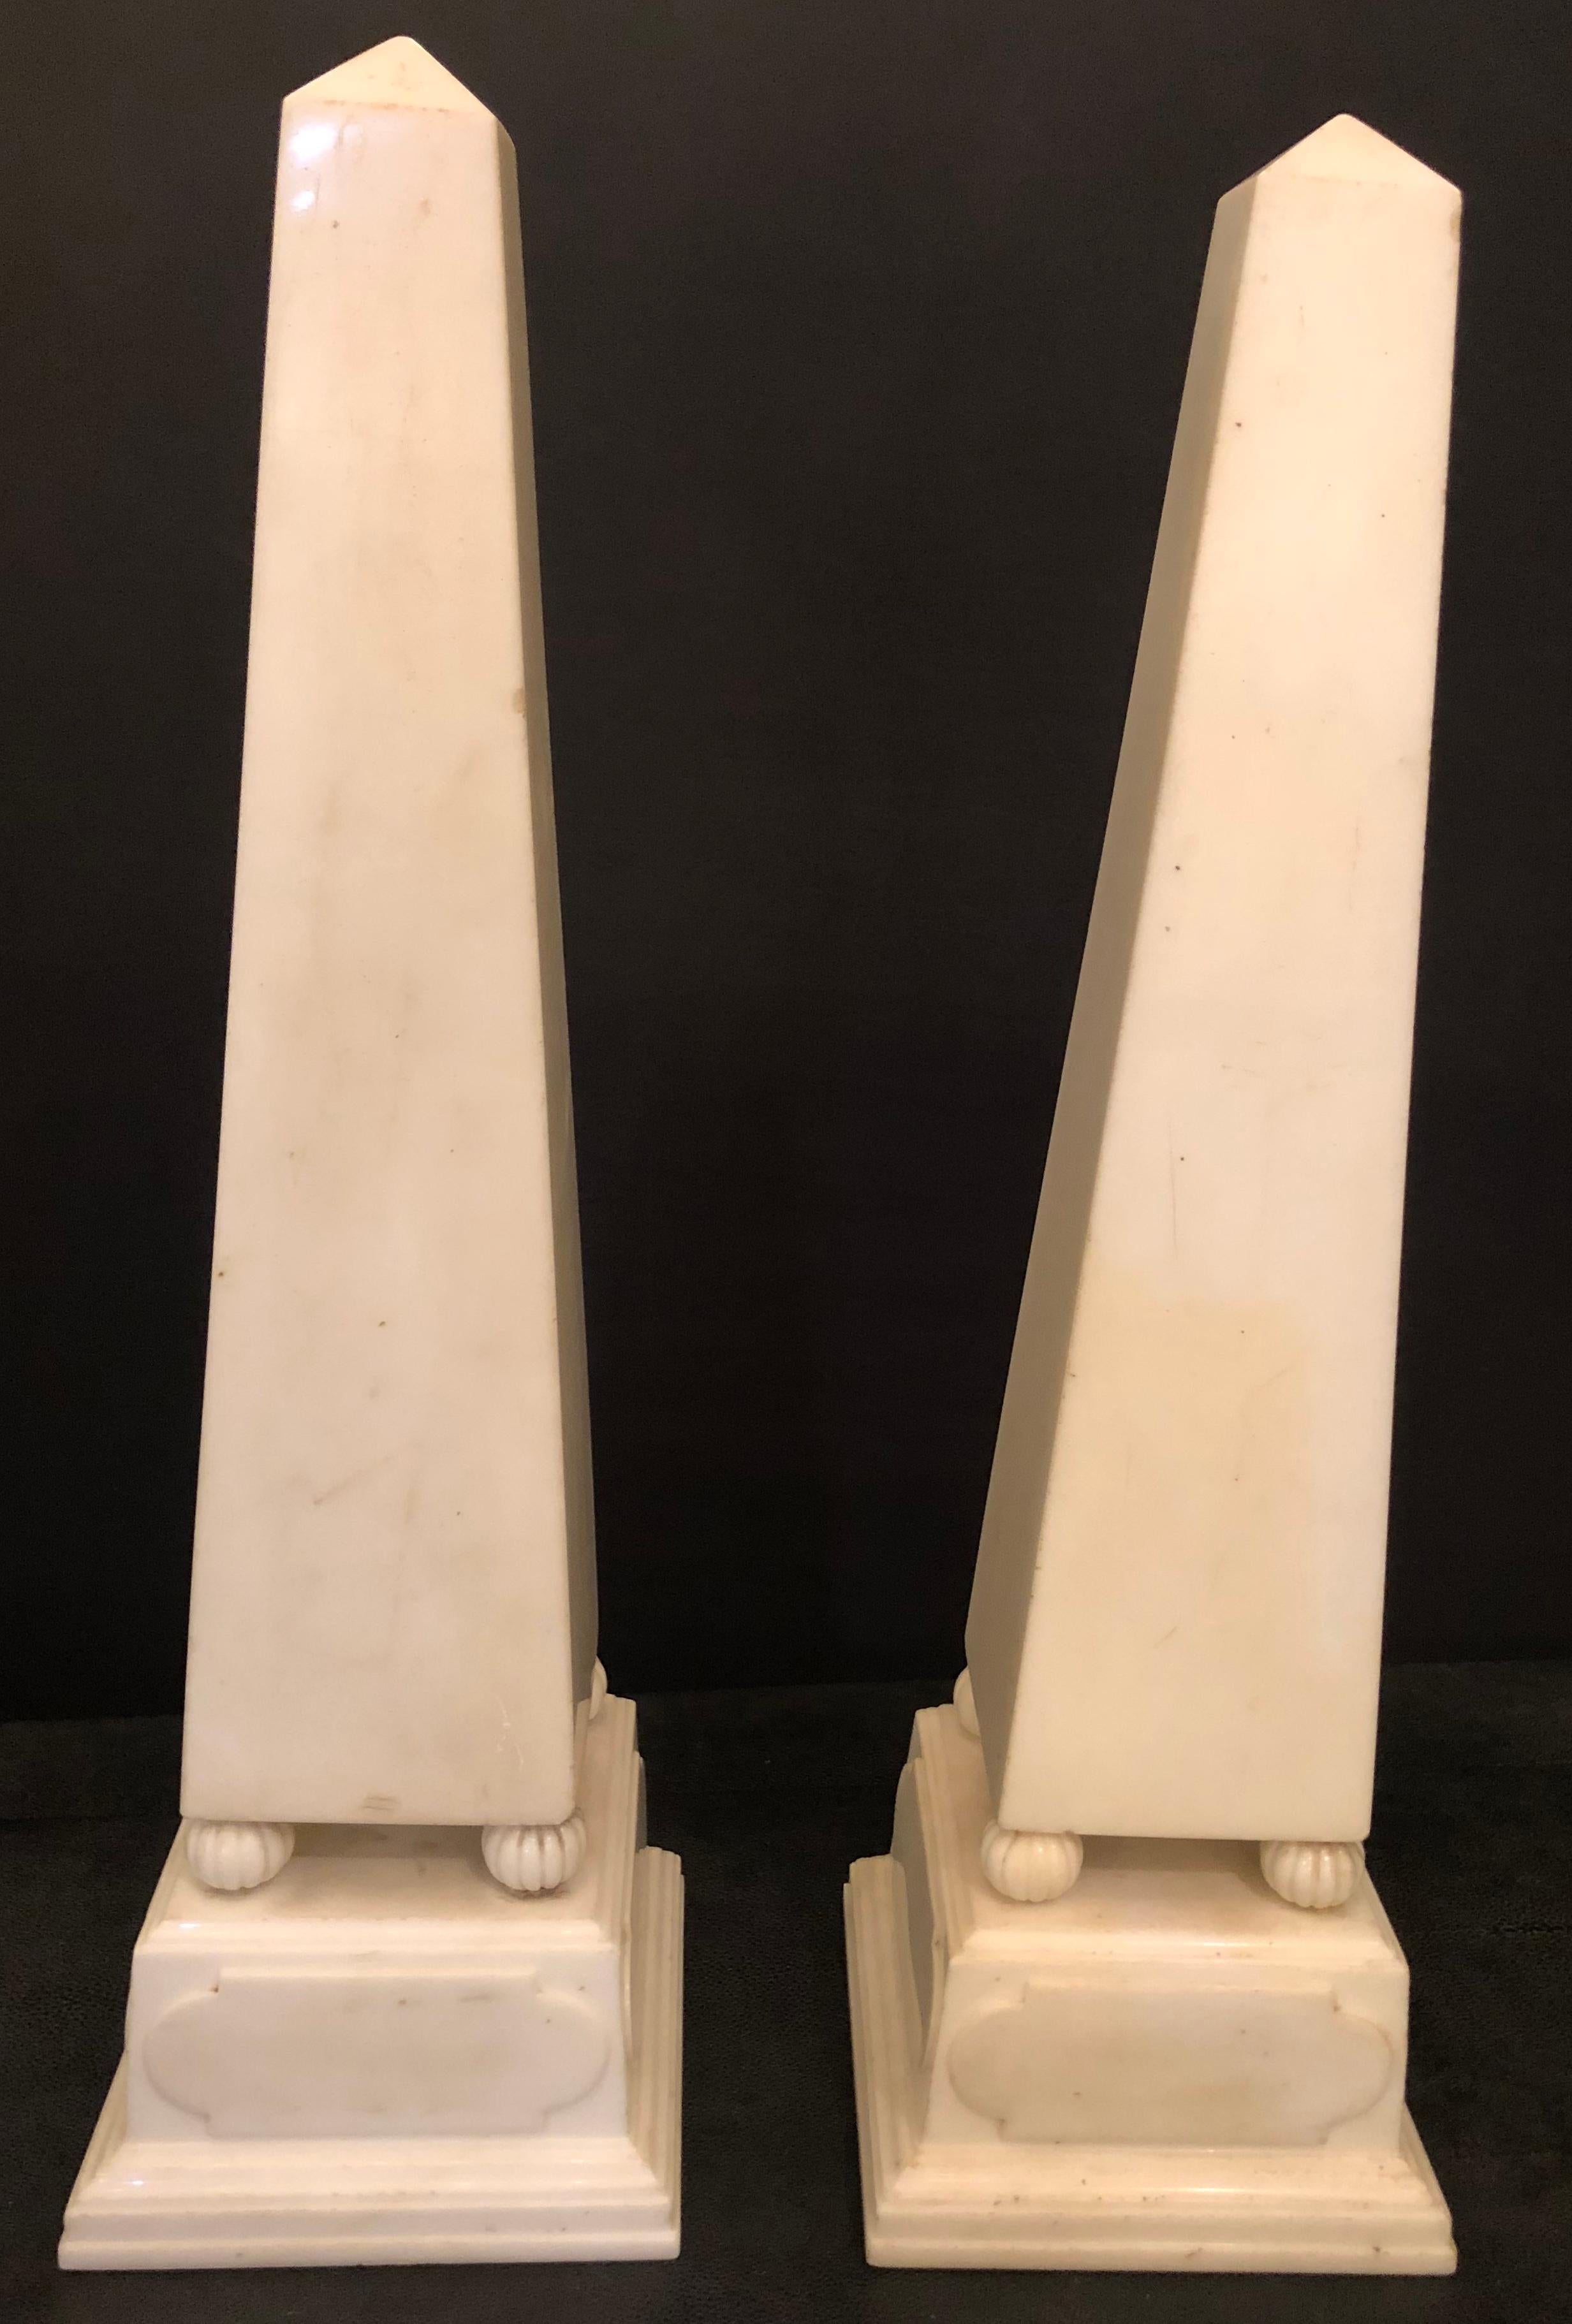 Pair of Large Antique 19th-20th Century Solid Marble Obelisks on Pedestals In Good Condition For Sale In Stamford, CT